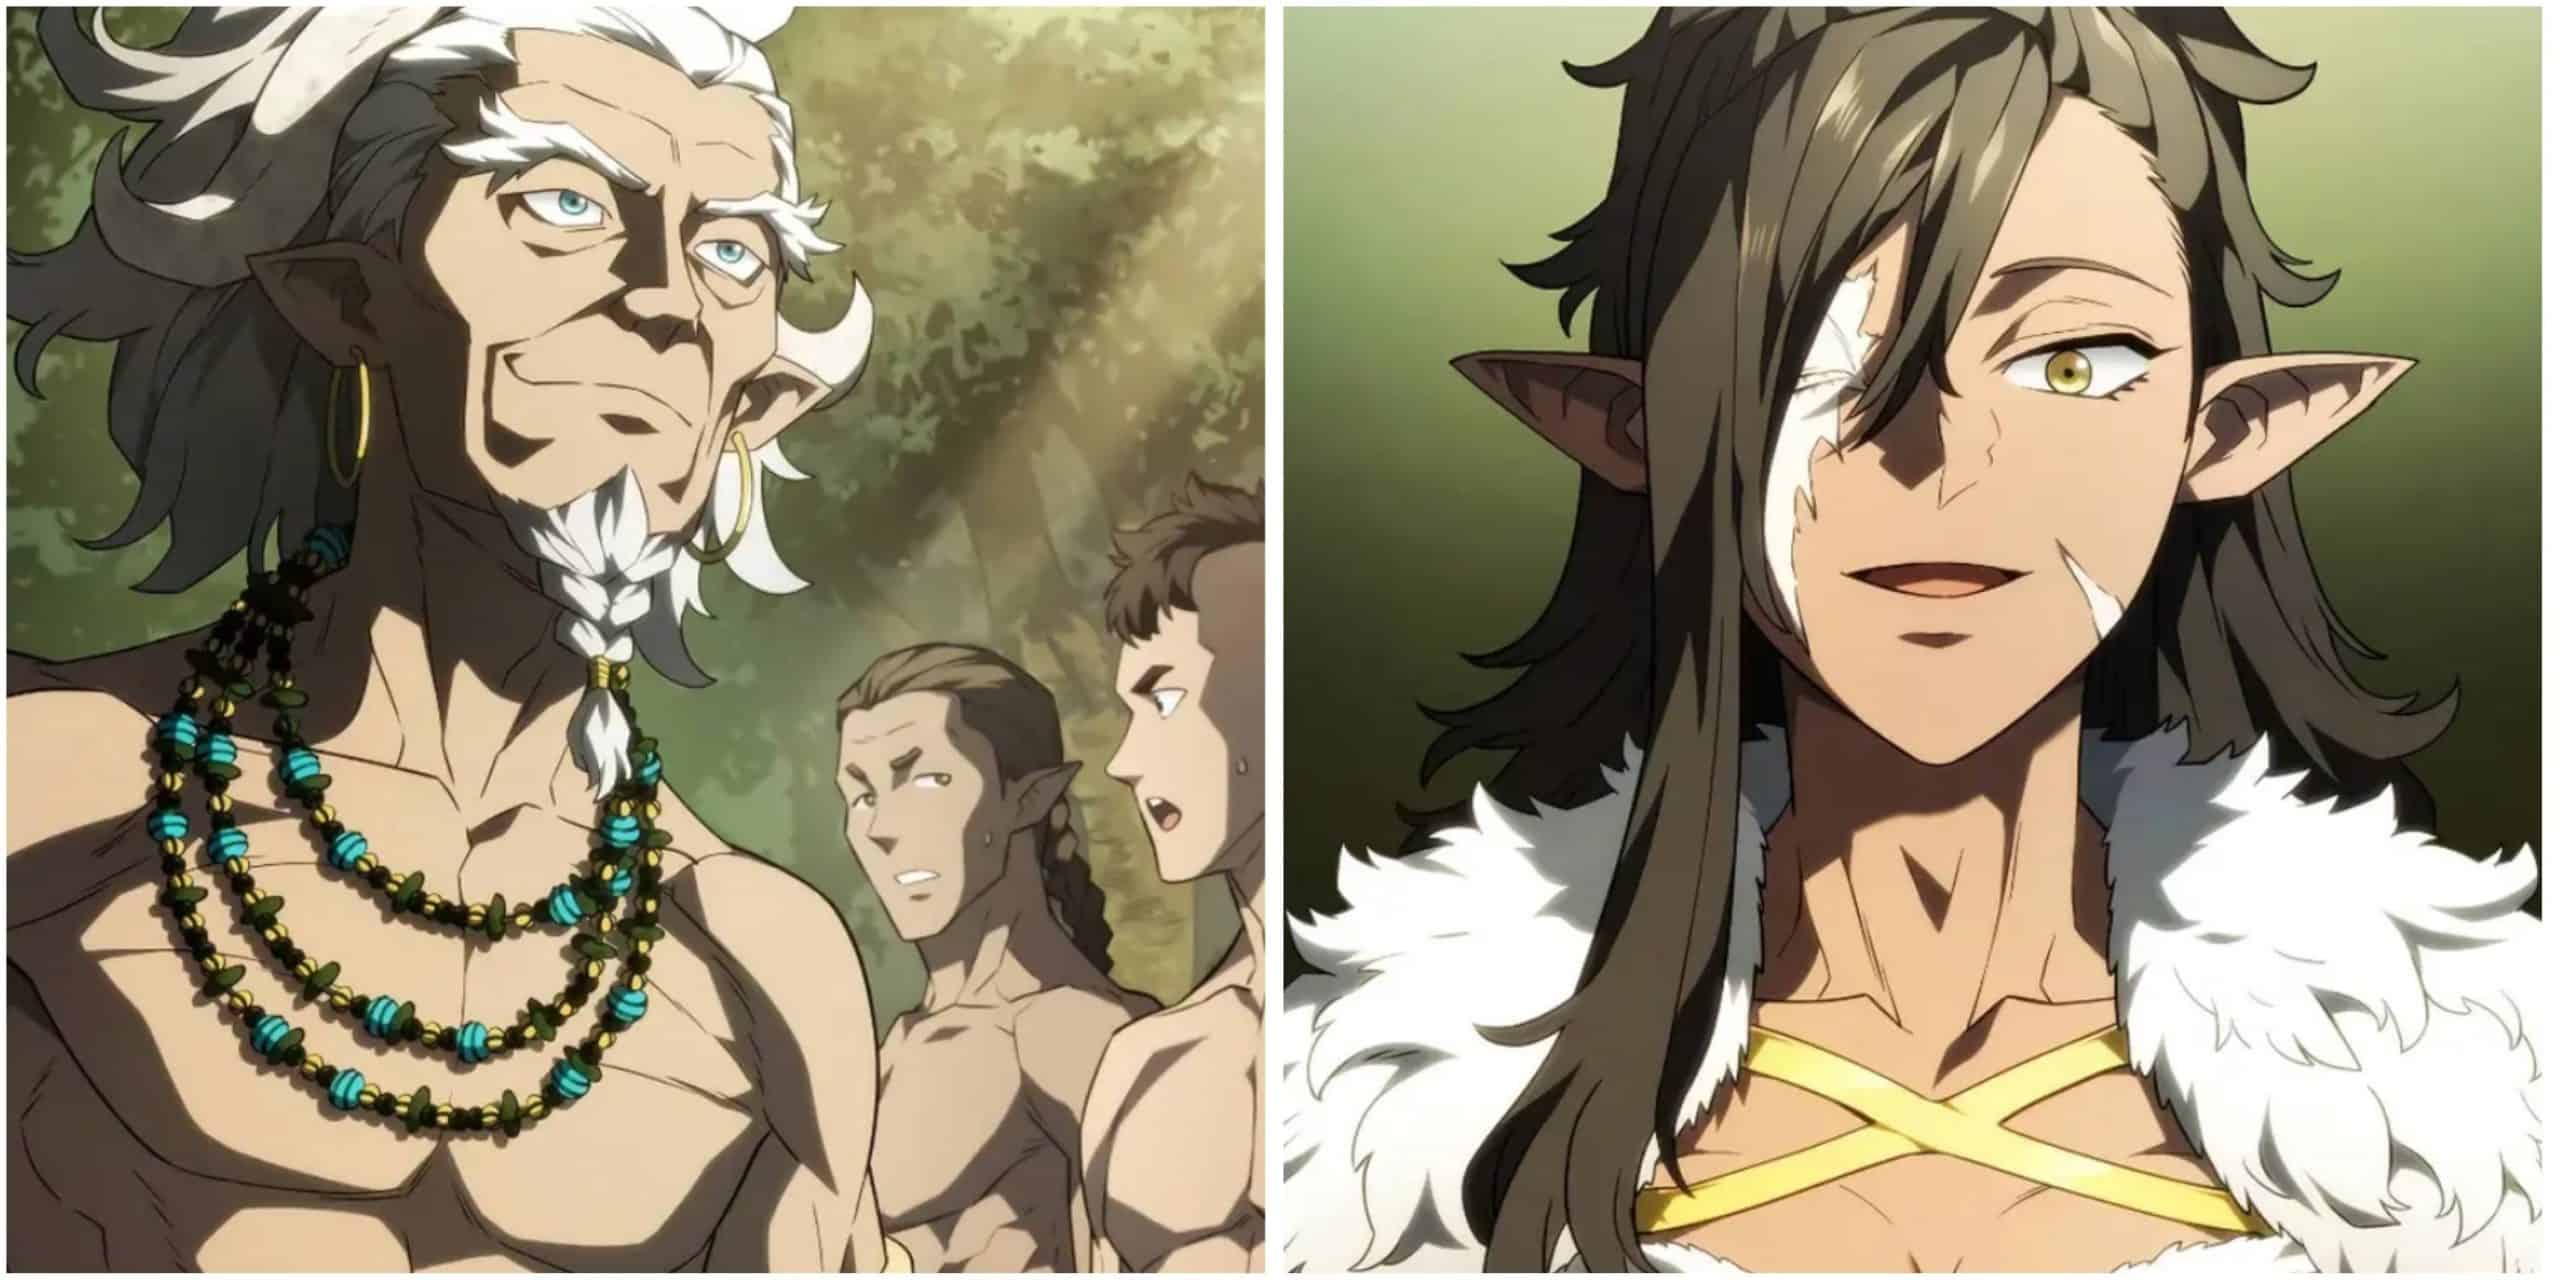 Village Chief And Akwilla From Revenge of the Iron-Blooded Sword Hound